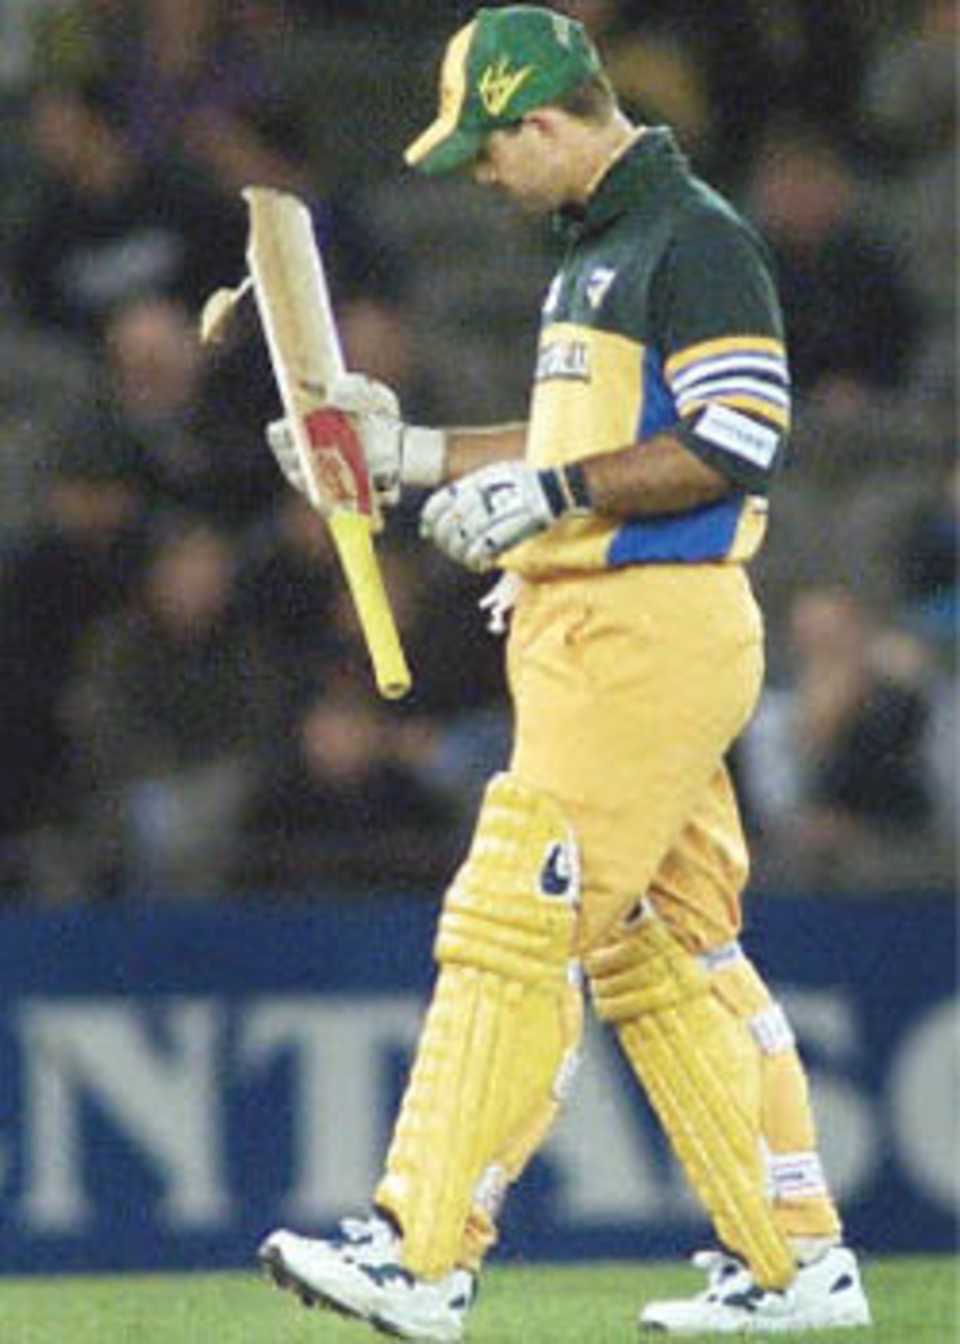 Australian batsman Ricky Ponting inspects his broken bat after attempting to smash a delivery from a South African bowler in an exciting climax to their one day cricket match being played under a closed roof at the Colonial Stadium in Melbourne. Being played in the middle of winter in Melbourne, Australia tied with South Africa's 226-8 but leads the three match series 1-0. South Africa in Australia, 2000/01, 2nd One-Day International, Australia v South Africa, Colonial Stadium, Melbourne, 18 August 2000.